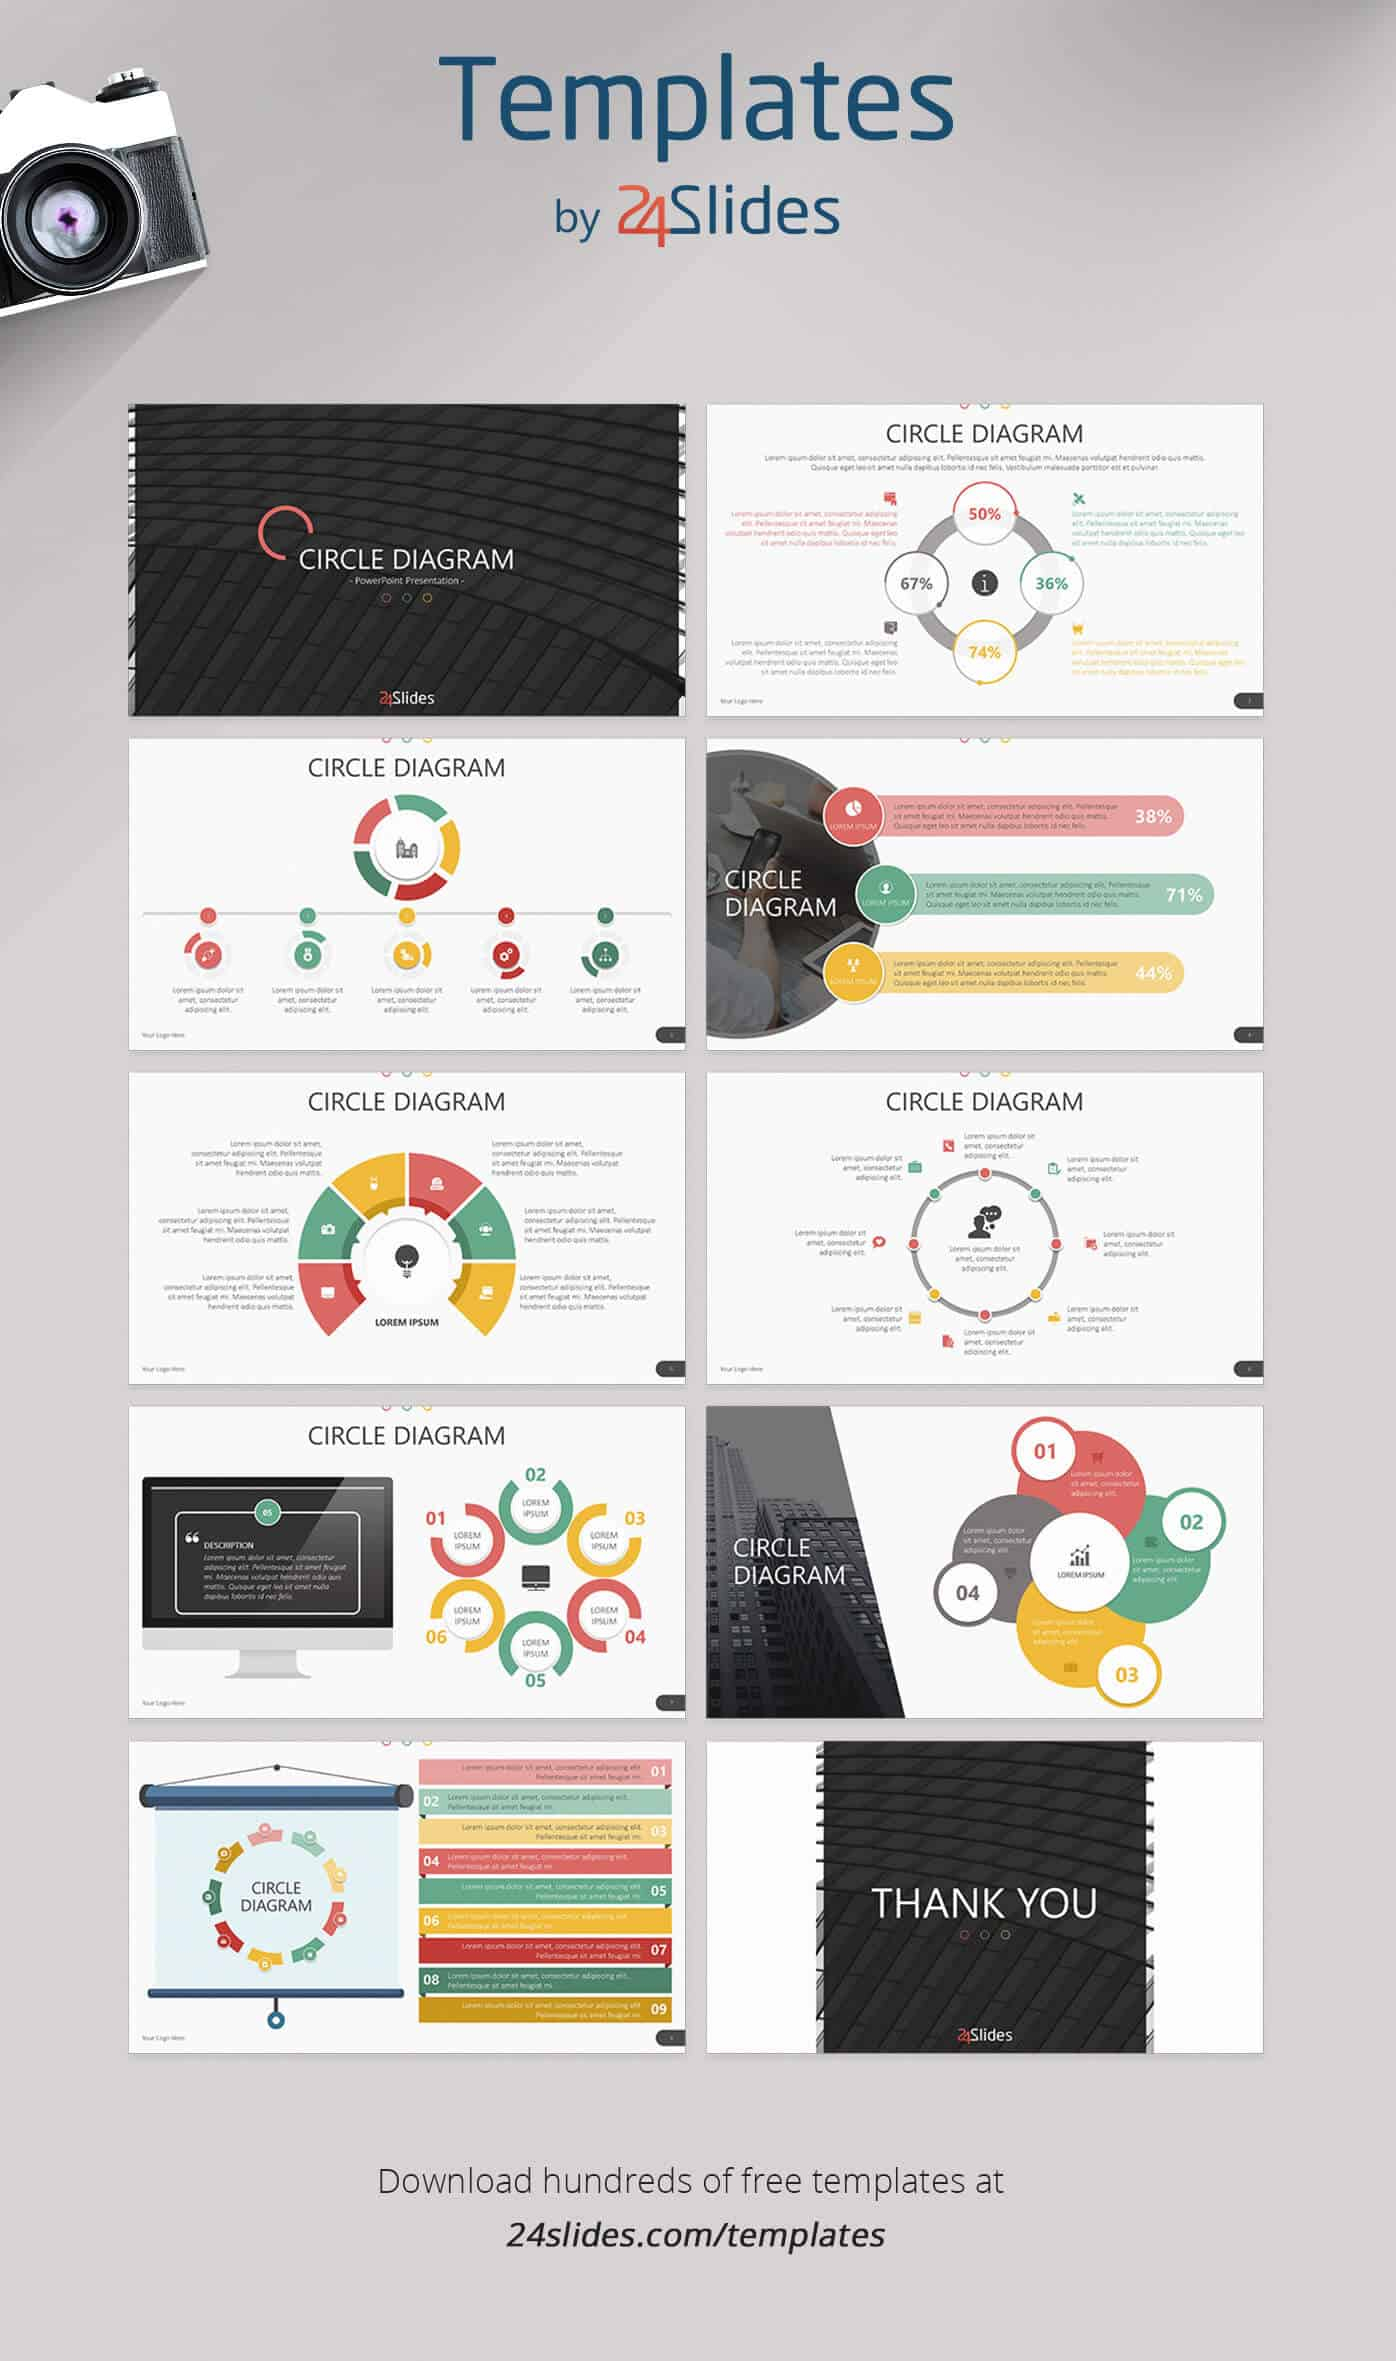 15 Fun And Colorful Free Powerpoint Templates | Present Better Regarding How To Design A Powerpoint Template